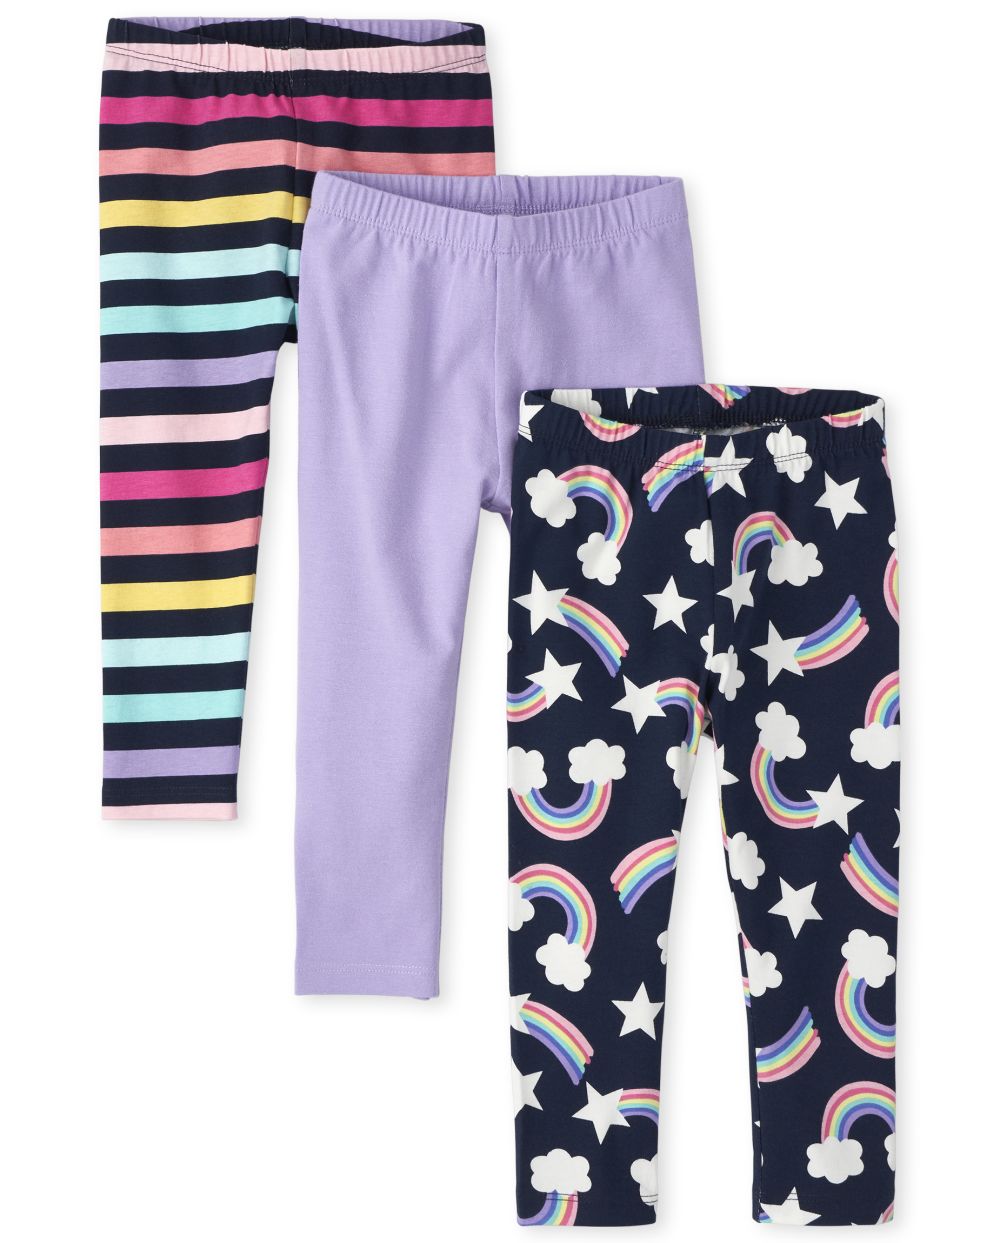 Toddler Girls Rainbow, Solid And Striped Leggings 3-Pack